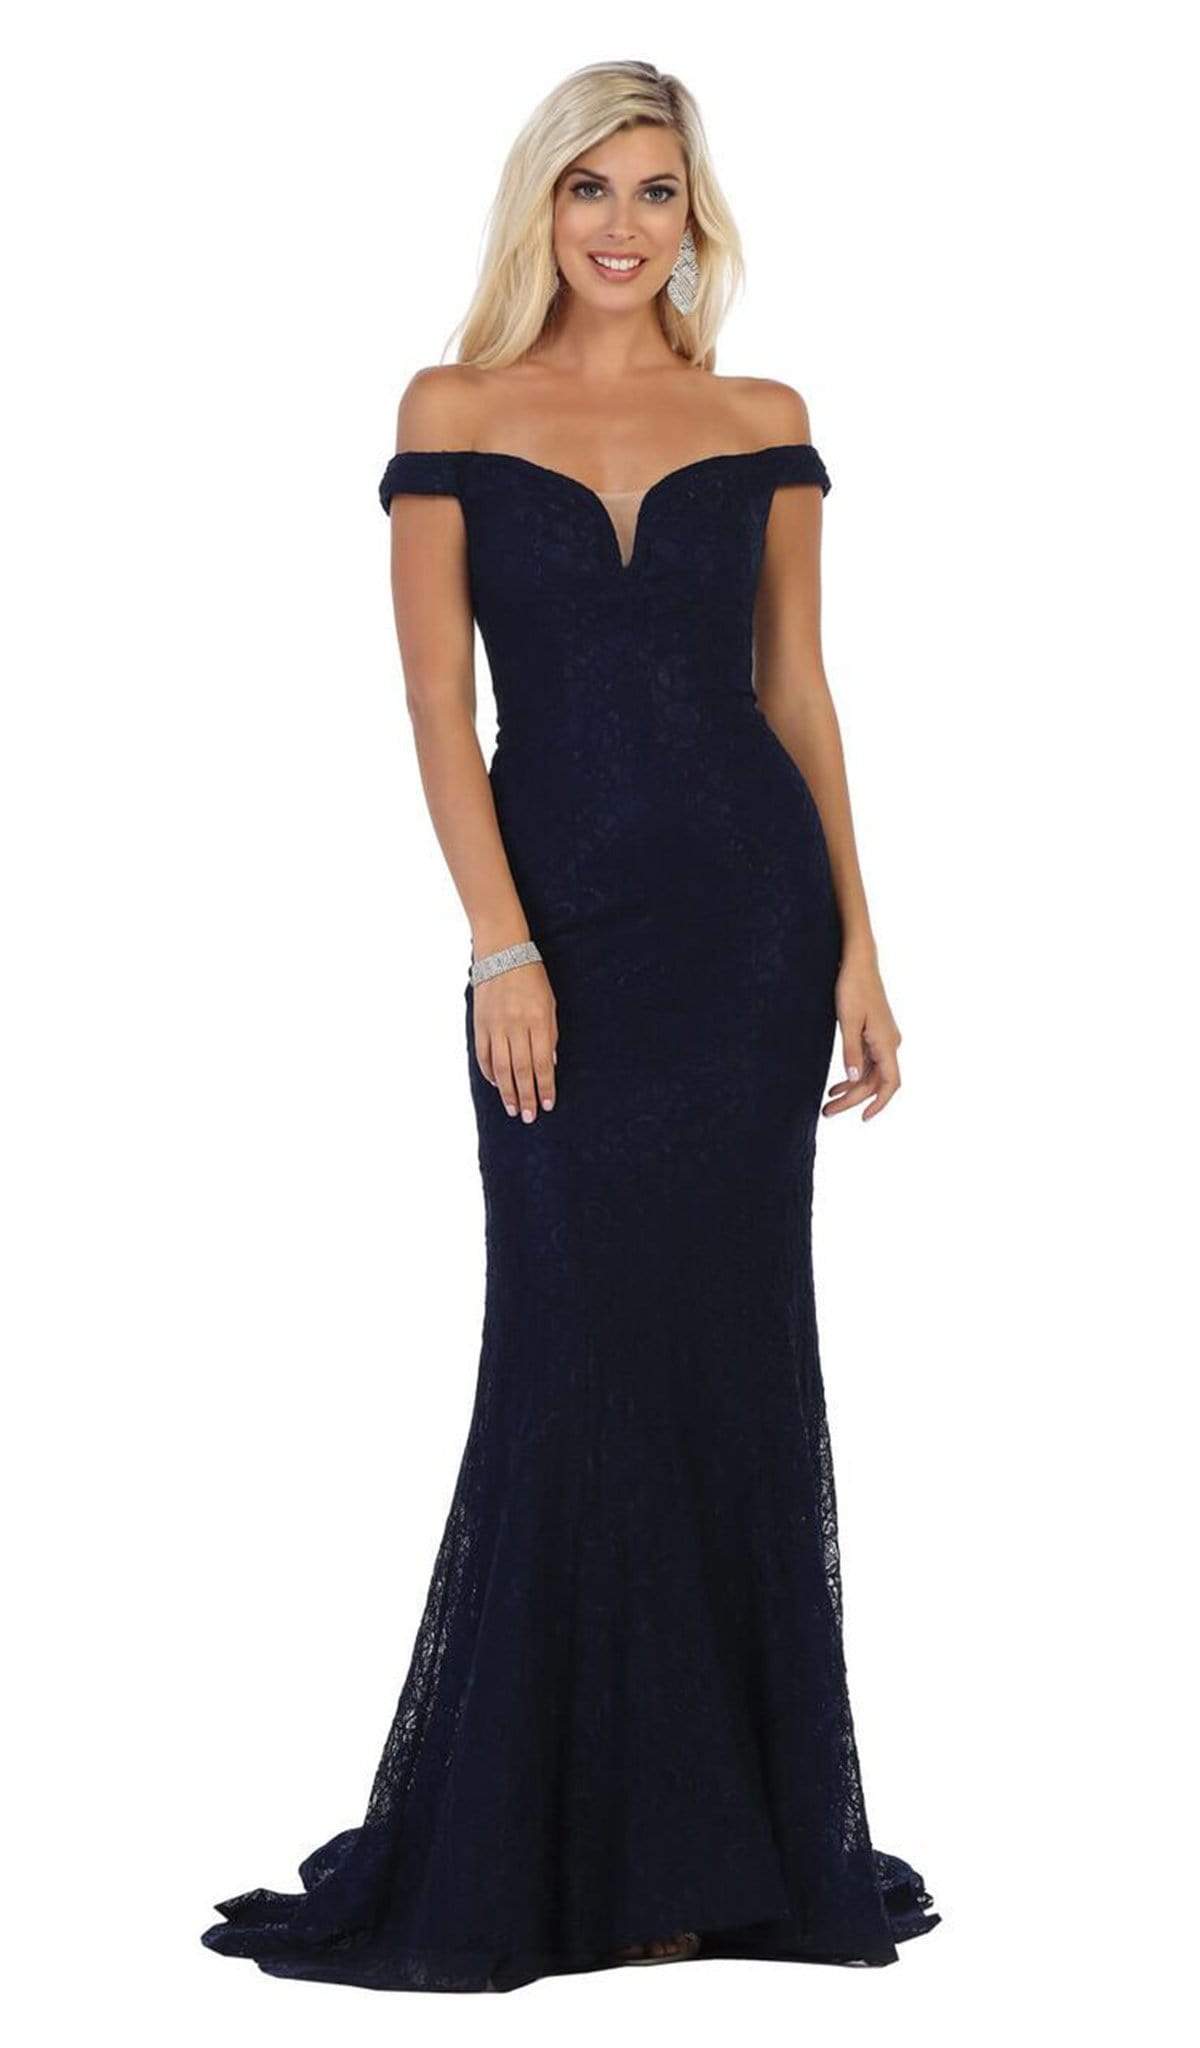 May Queen - MQ1596 Allover Lace Off Shoulder Lace Up back Mermaid Gown Bridesmaid Dresses 4 / Navy